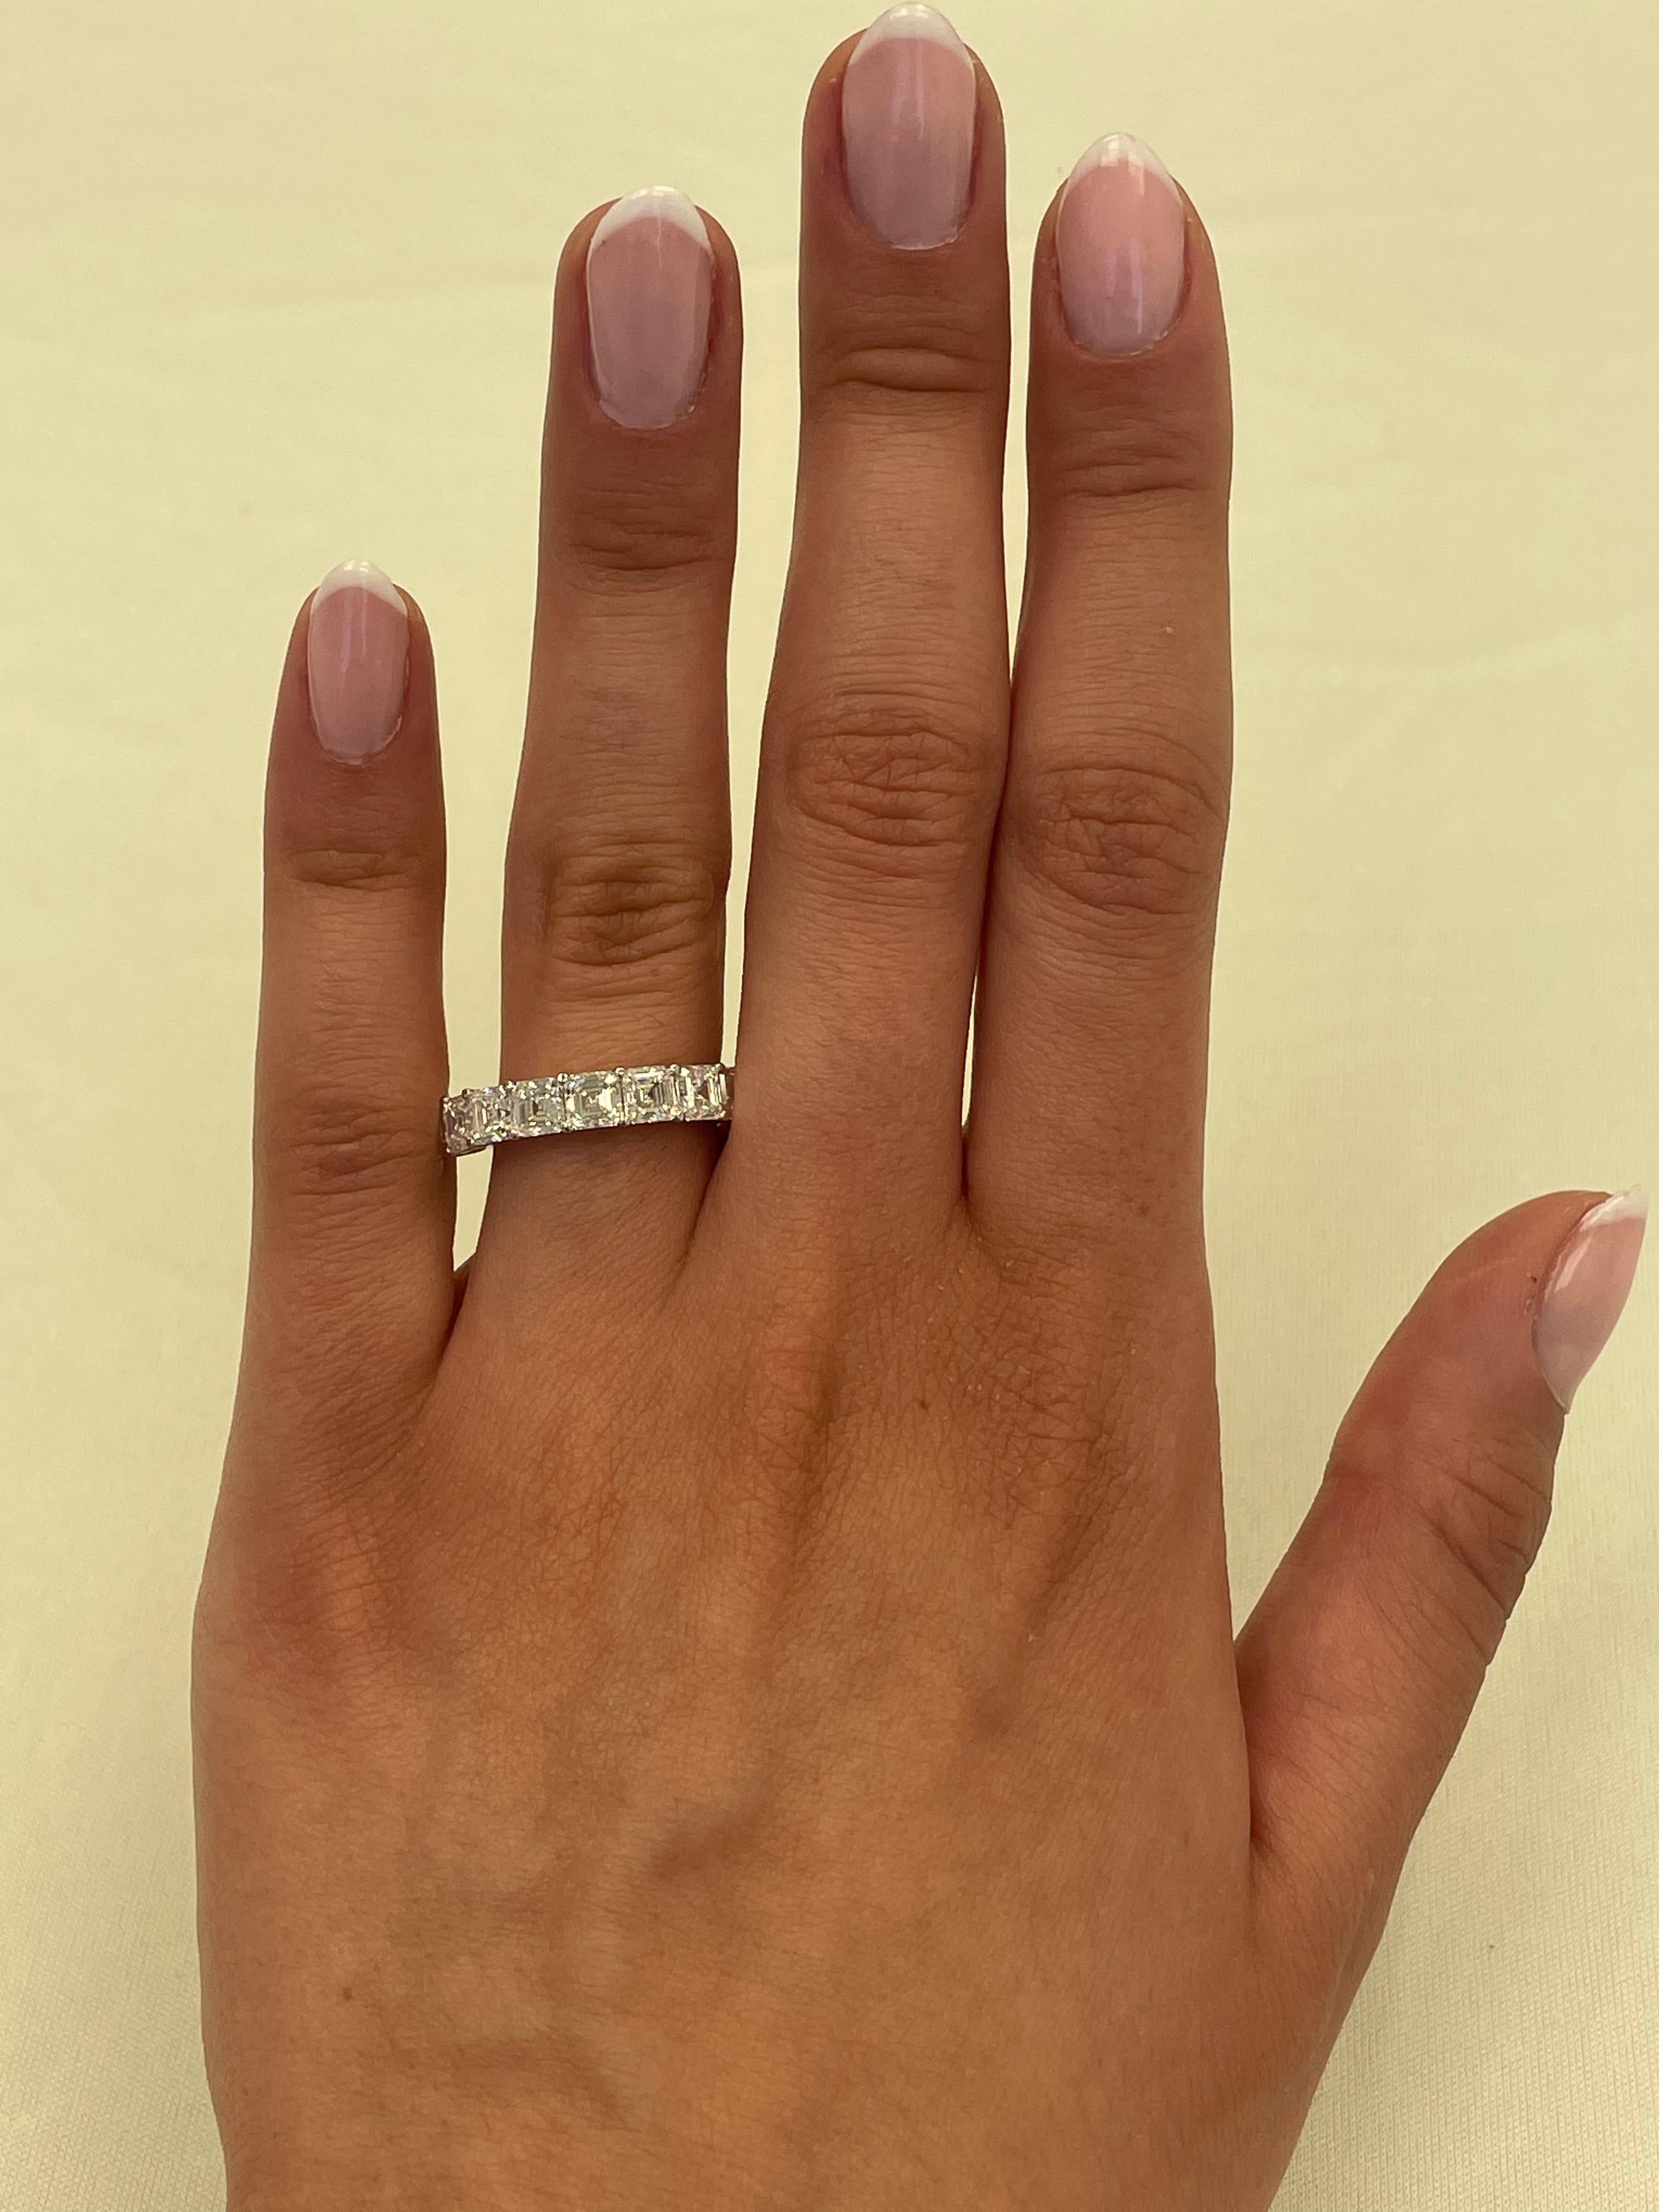 Stunning asscher cut diamond eternity band, By Alexander Beverly Hills.
8 asscher cut diamonds, 2.82 carats. D/E color and VVS clarity. 18-karat white gold, 3.45 grams, size 6.25. 
Accommodated with an up to date appraisal by a GIA G.G. upon